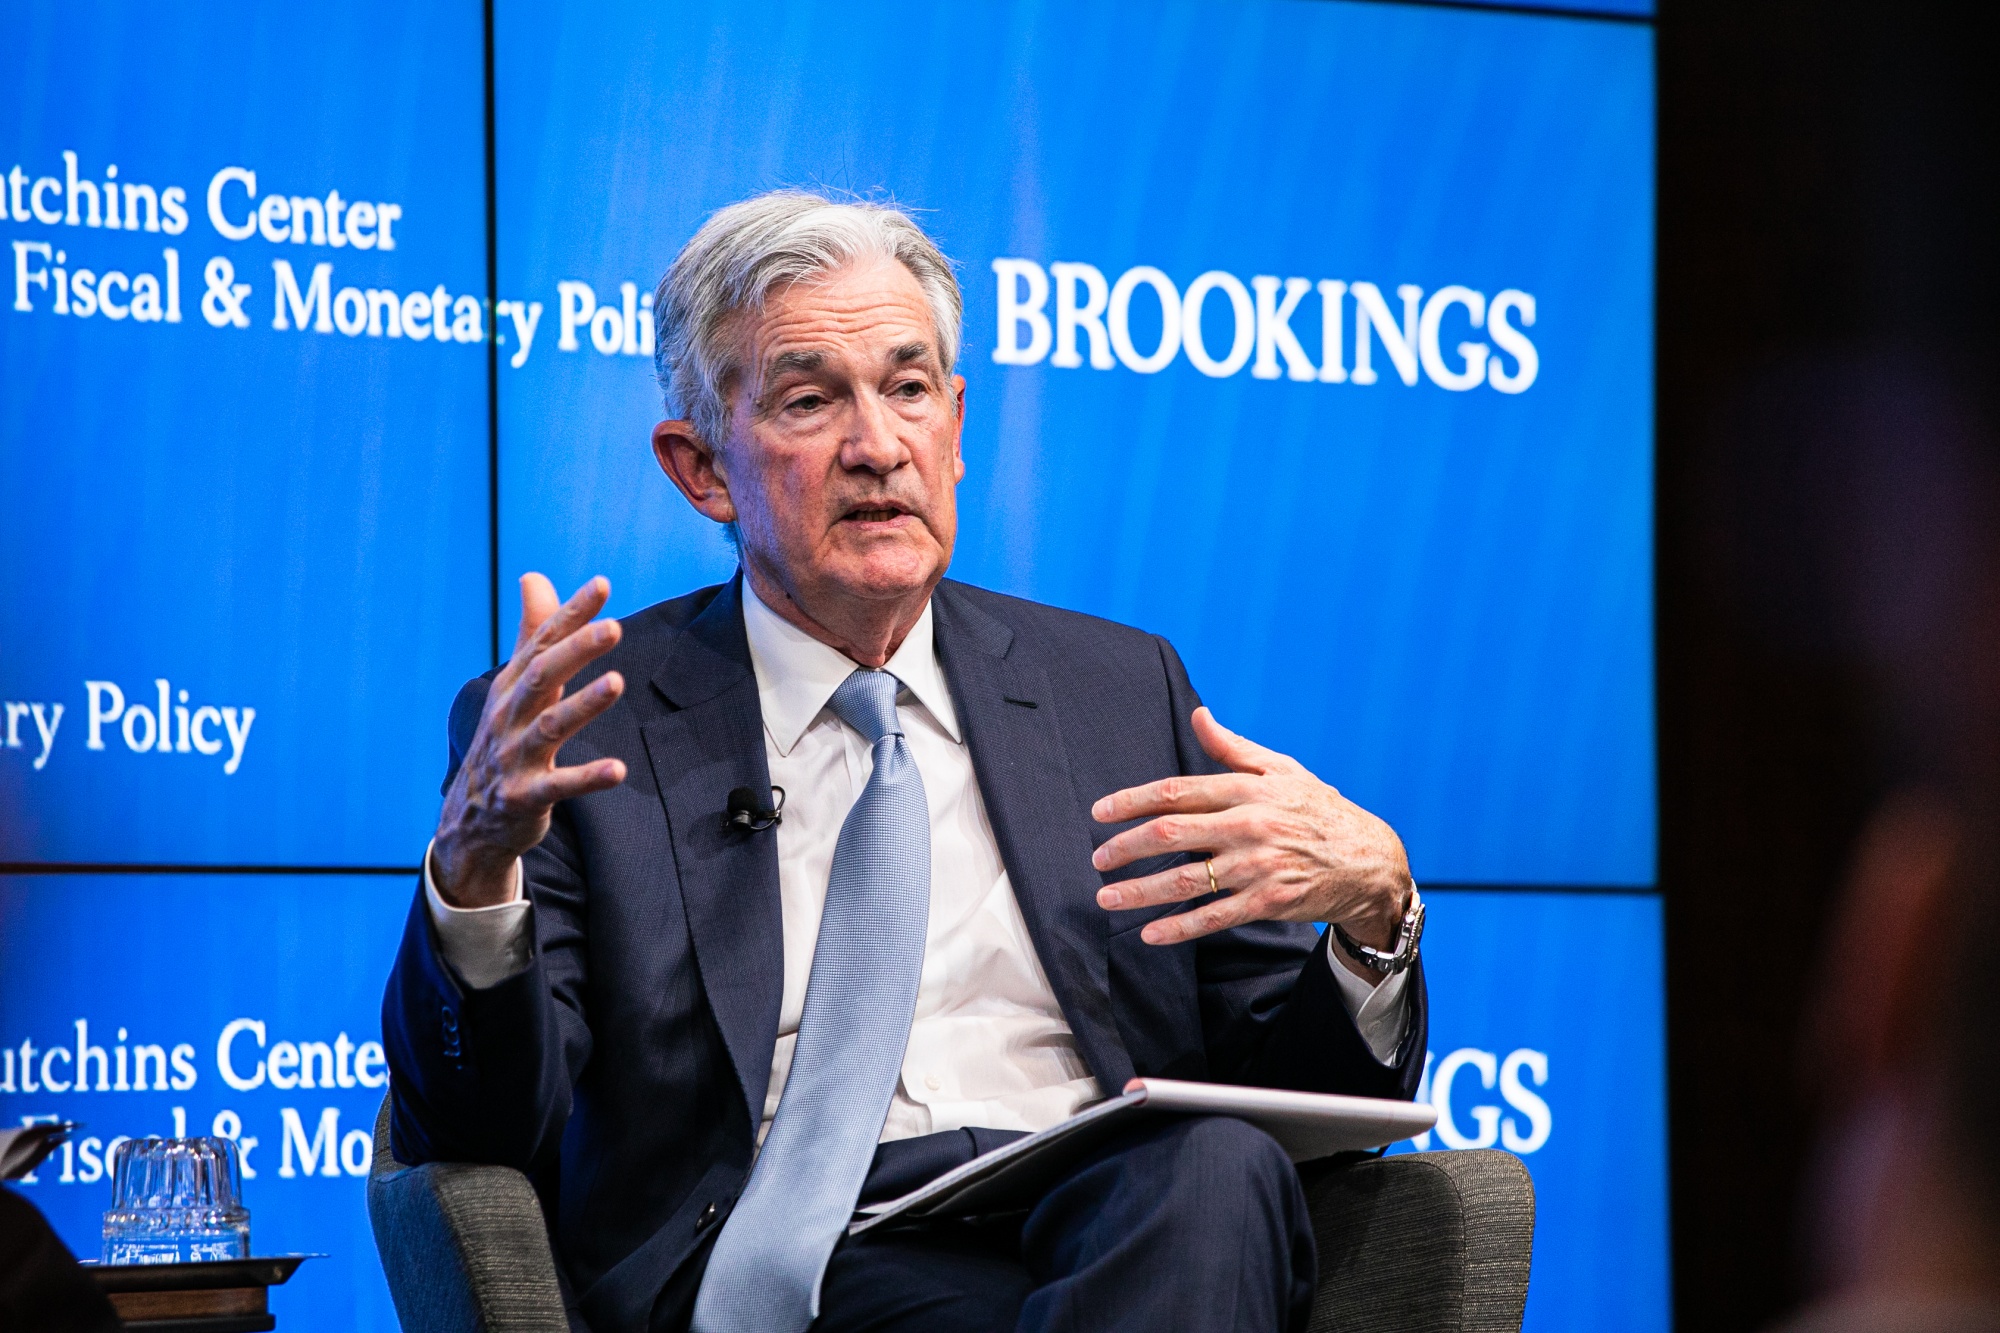 Jerome Powell, chairman of the US Federal Reserve, speaks at the Brookings Institution in Washington on Nov. 30.